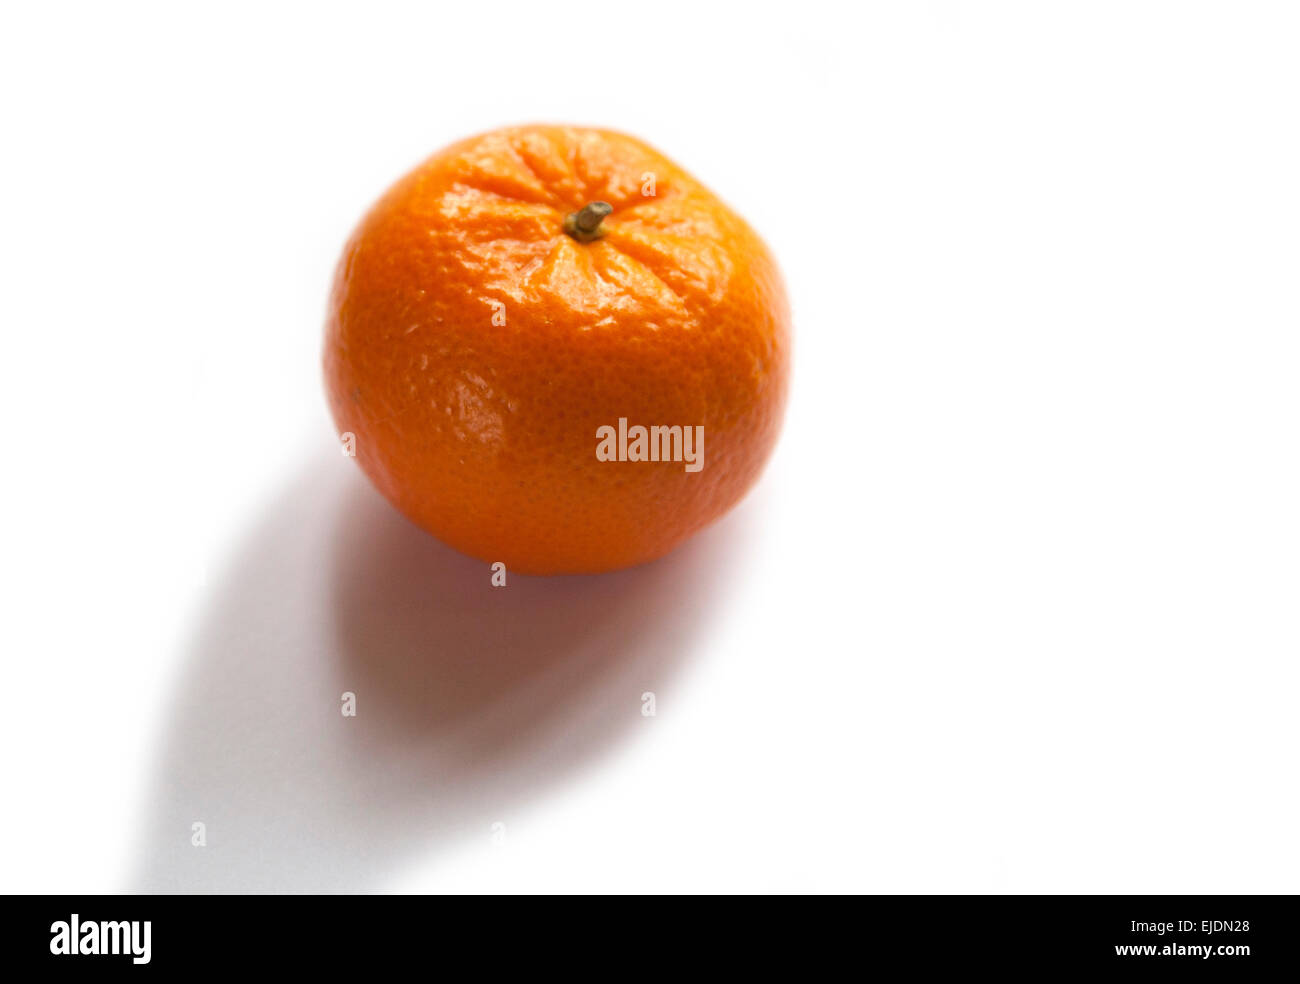 a fresh entire Orange fruit on a white background with a small shadow underneath Stock Photo